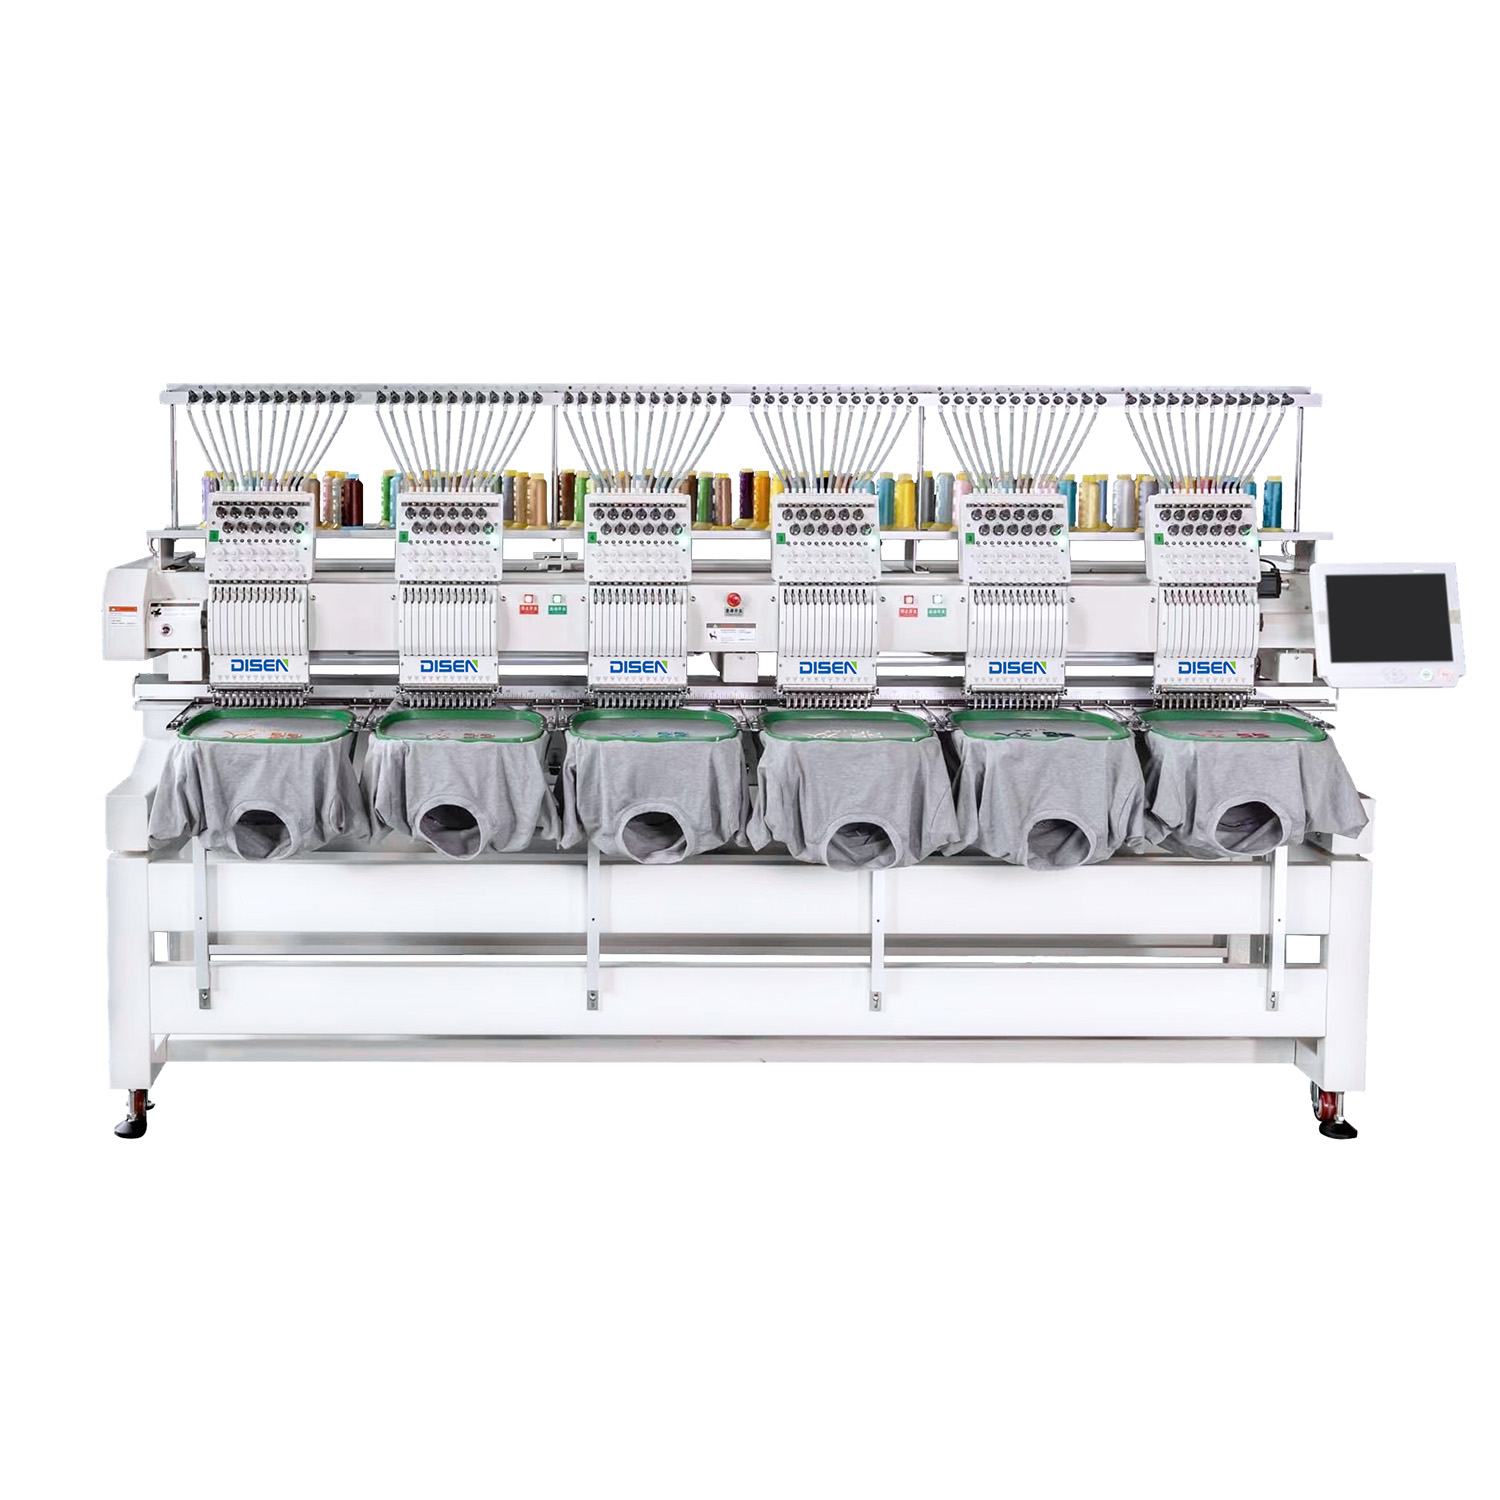 DS-J1206 High Speed Computerized Multi-head Embroidery Machine For Art